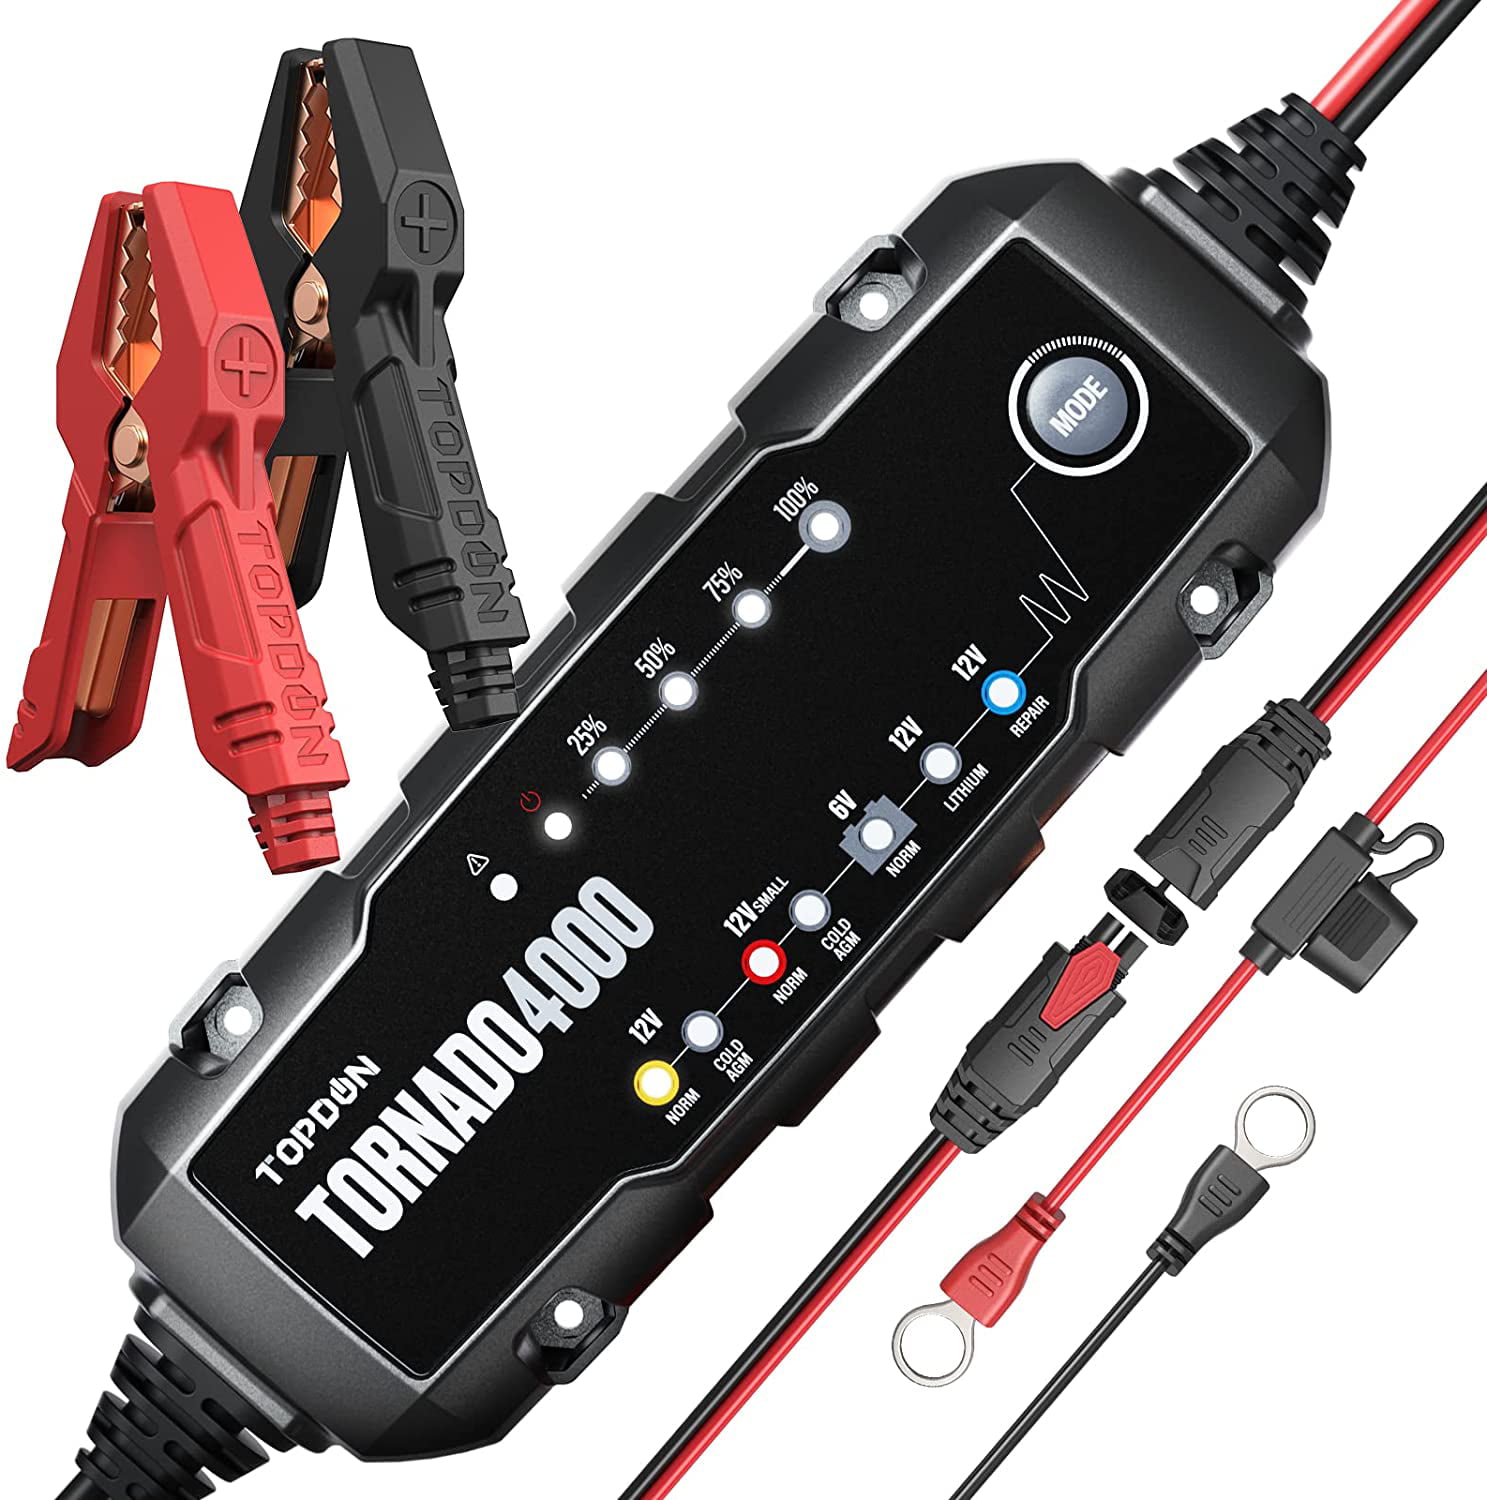 Topdon Car Battery Load Tester/Charger Maintainer/Portable Jump Starter Booster 